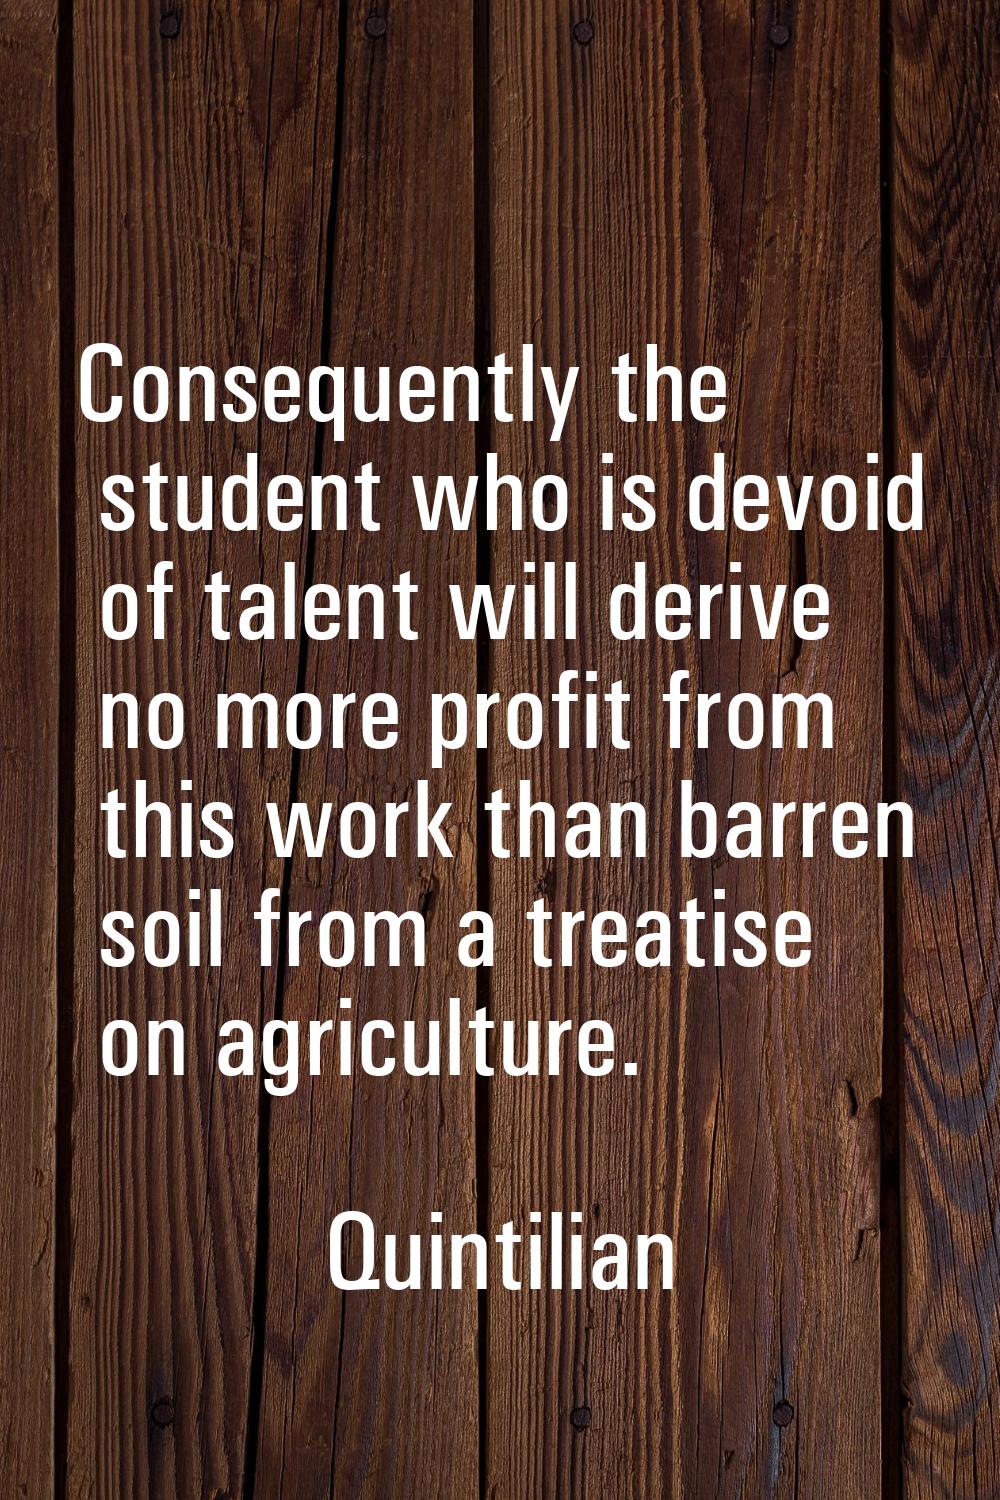 Consequently the student who is devoid of talent will derive no more profit from this work than bar